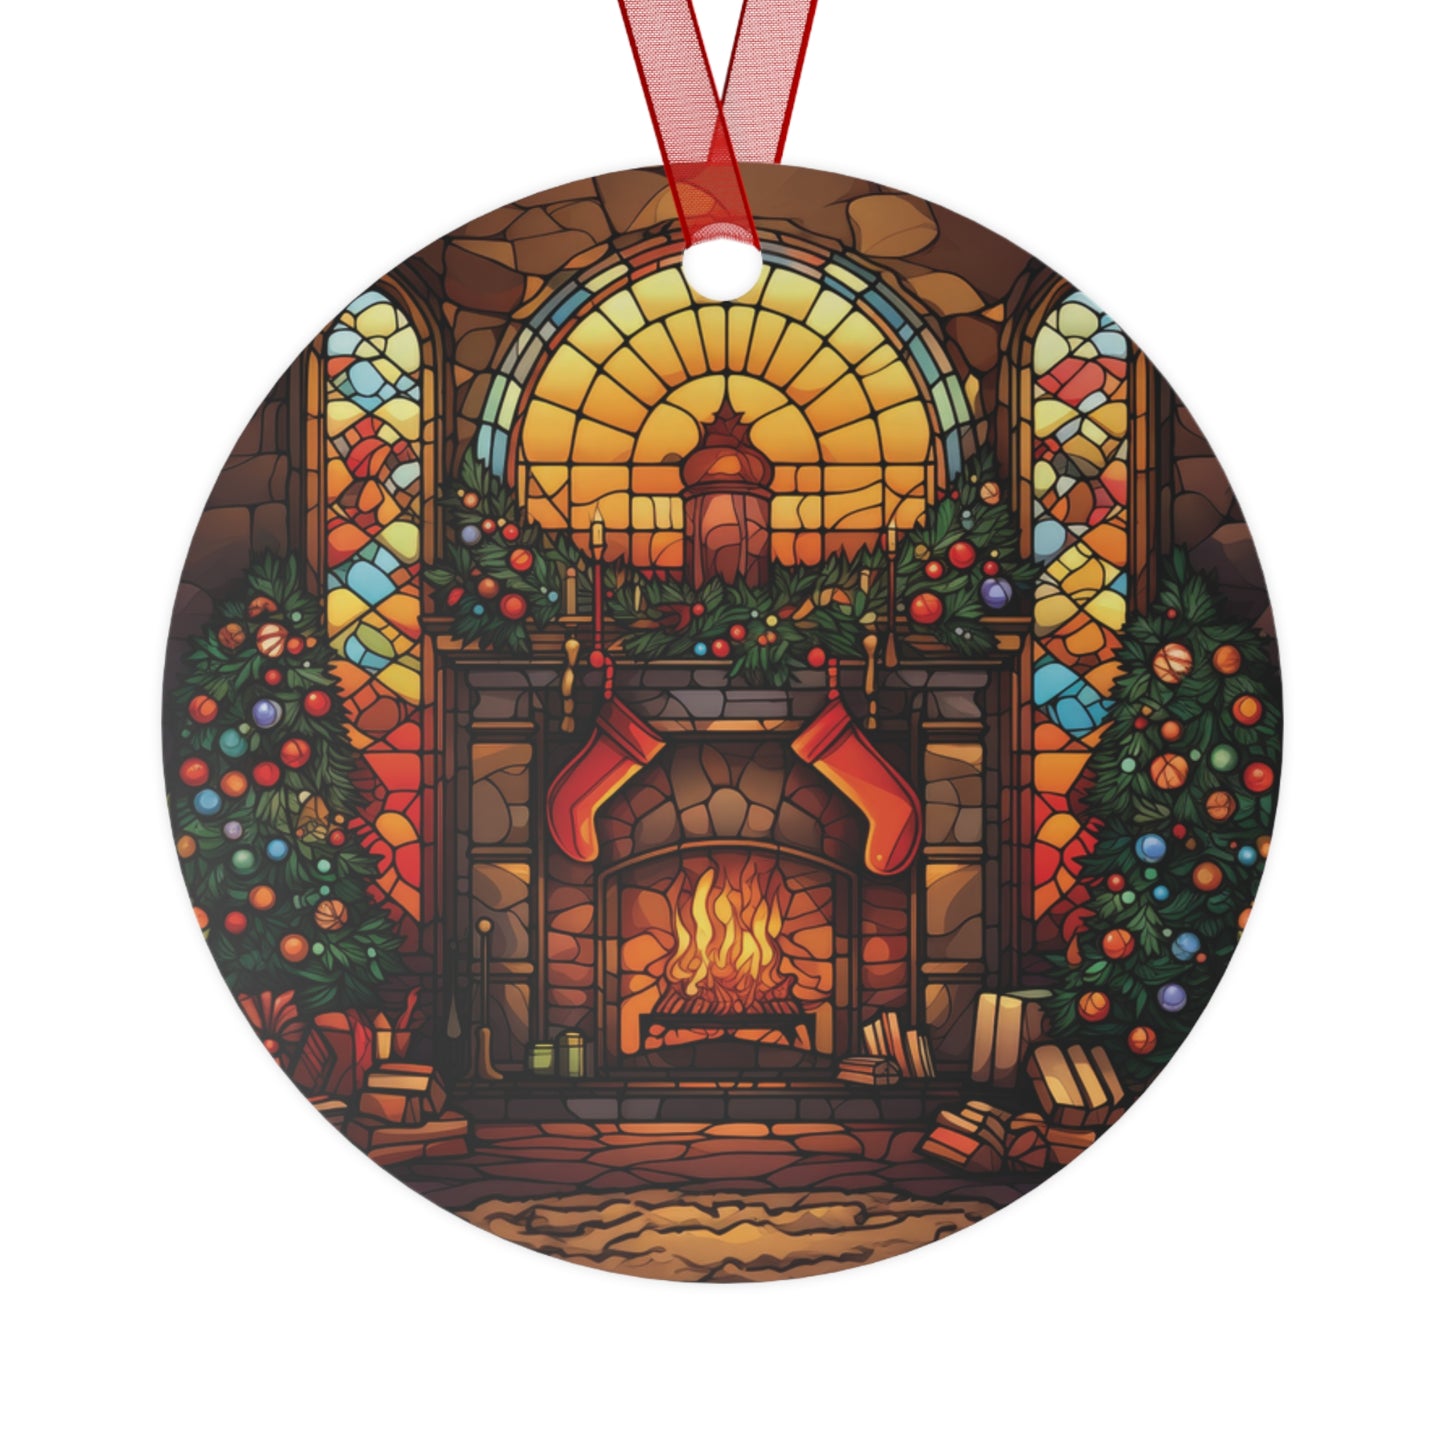 Cozy Christmas Fireplace Stained Glass Style Ornament Lightweight Shaterproof Metal Ornaments Christmas Ornament Exchange Decoration Gift